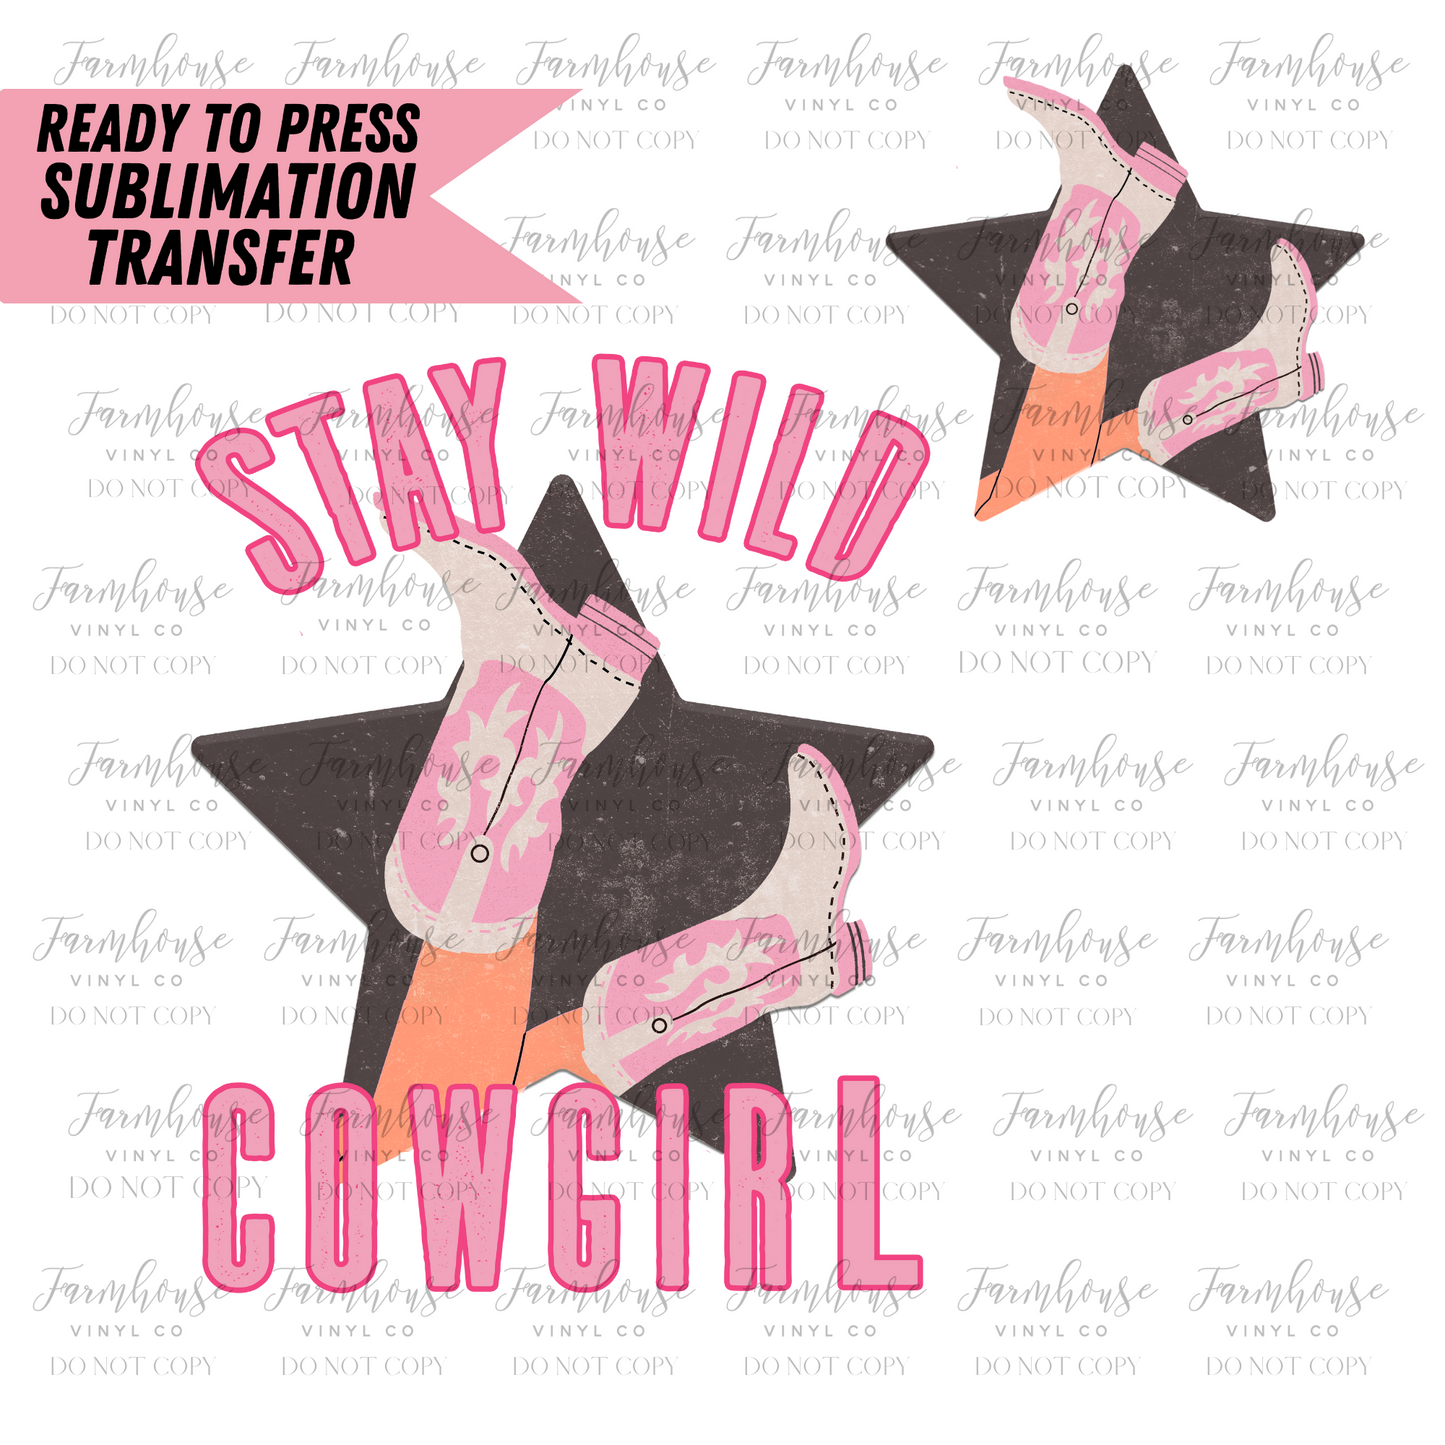 Stay Wild Cowgirl Ready To Press Sublimation Transfer - Farmhouse Vinyl Co